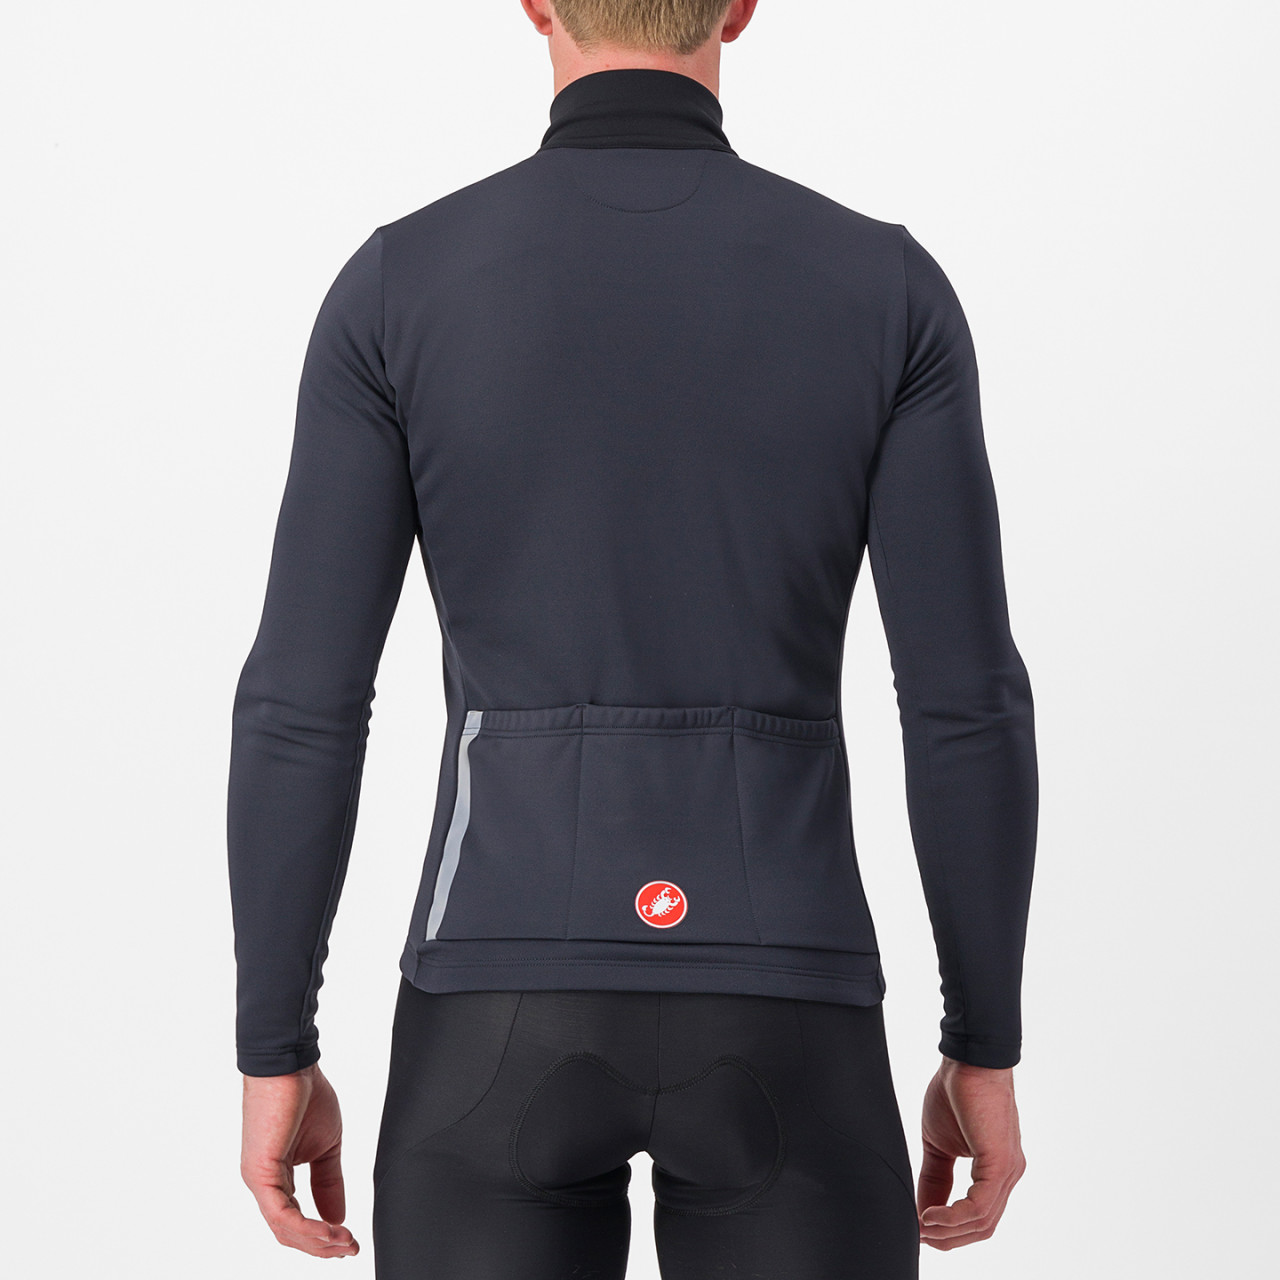 Entrata Thermal long-sleeved jersey